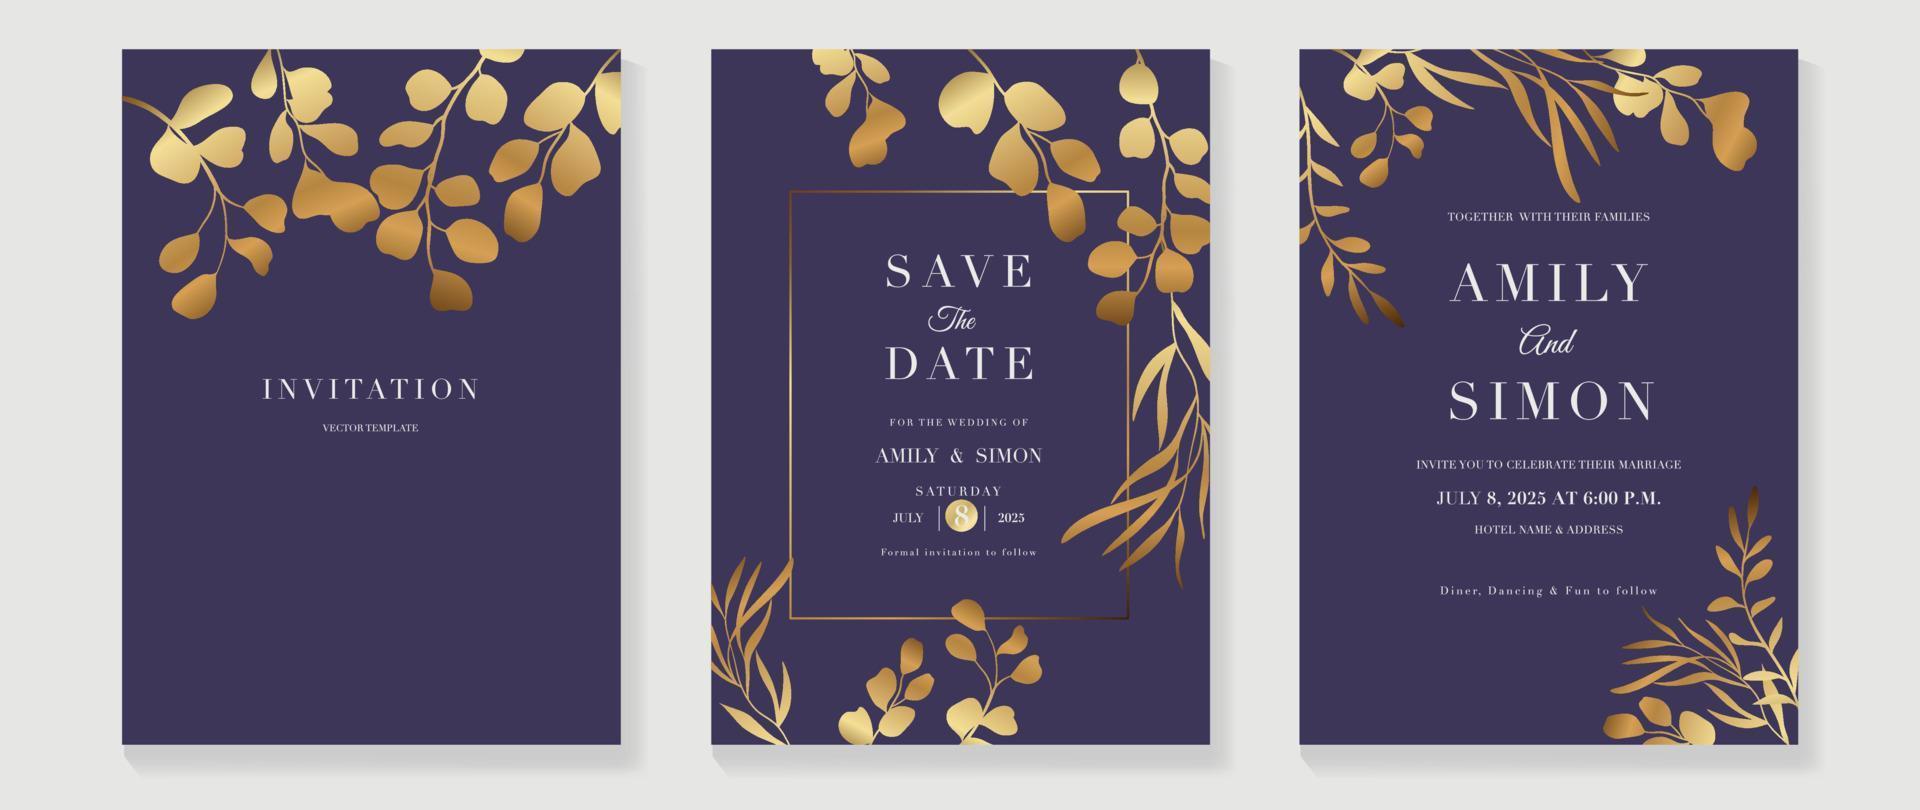 Luxury wedding invitation card background vector. Golden texture botanical floral leaf branch with geometric frame line art template. Design illustration for wedding and vip cover template, banner. vector